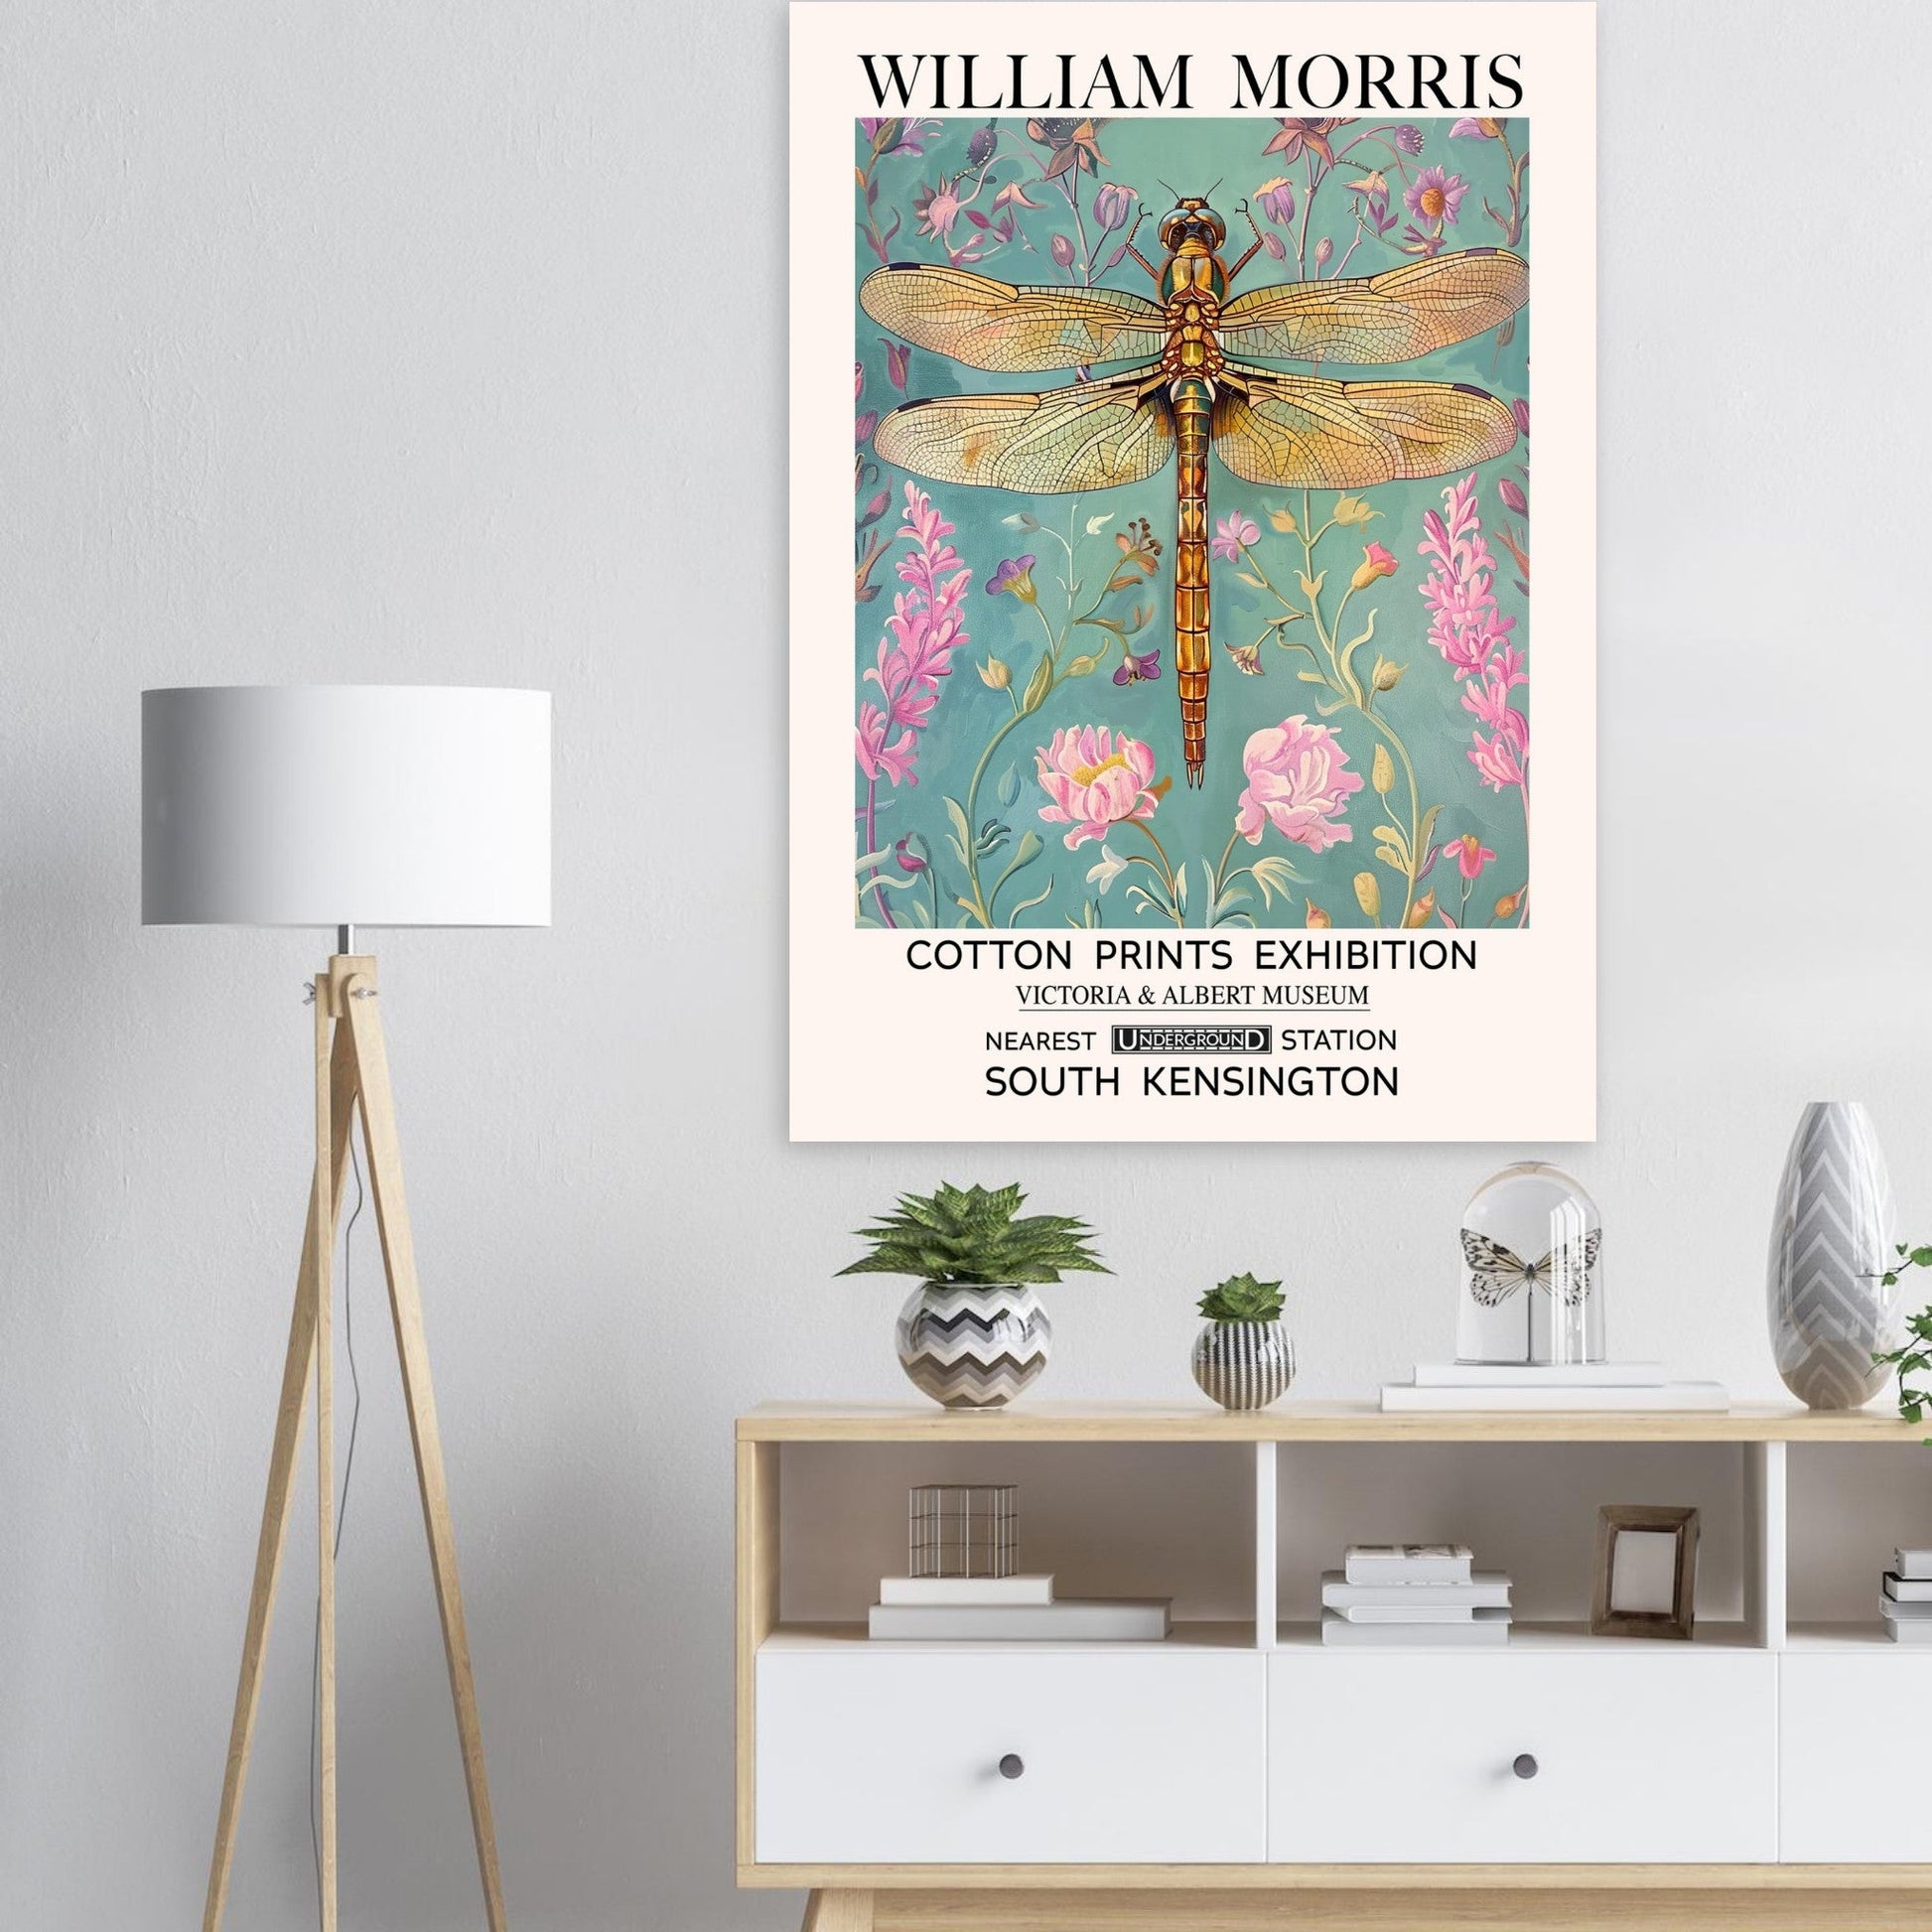 William Morris Print - The Dragonfly, Blue, Floral Background, , #illieeart